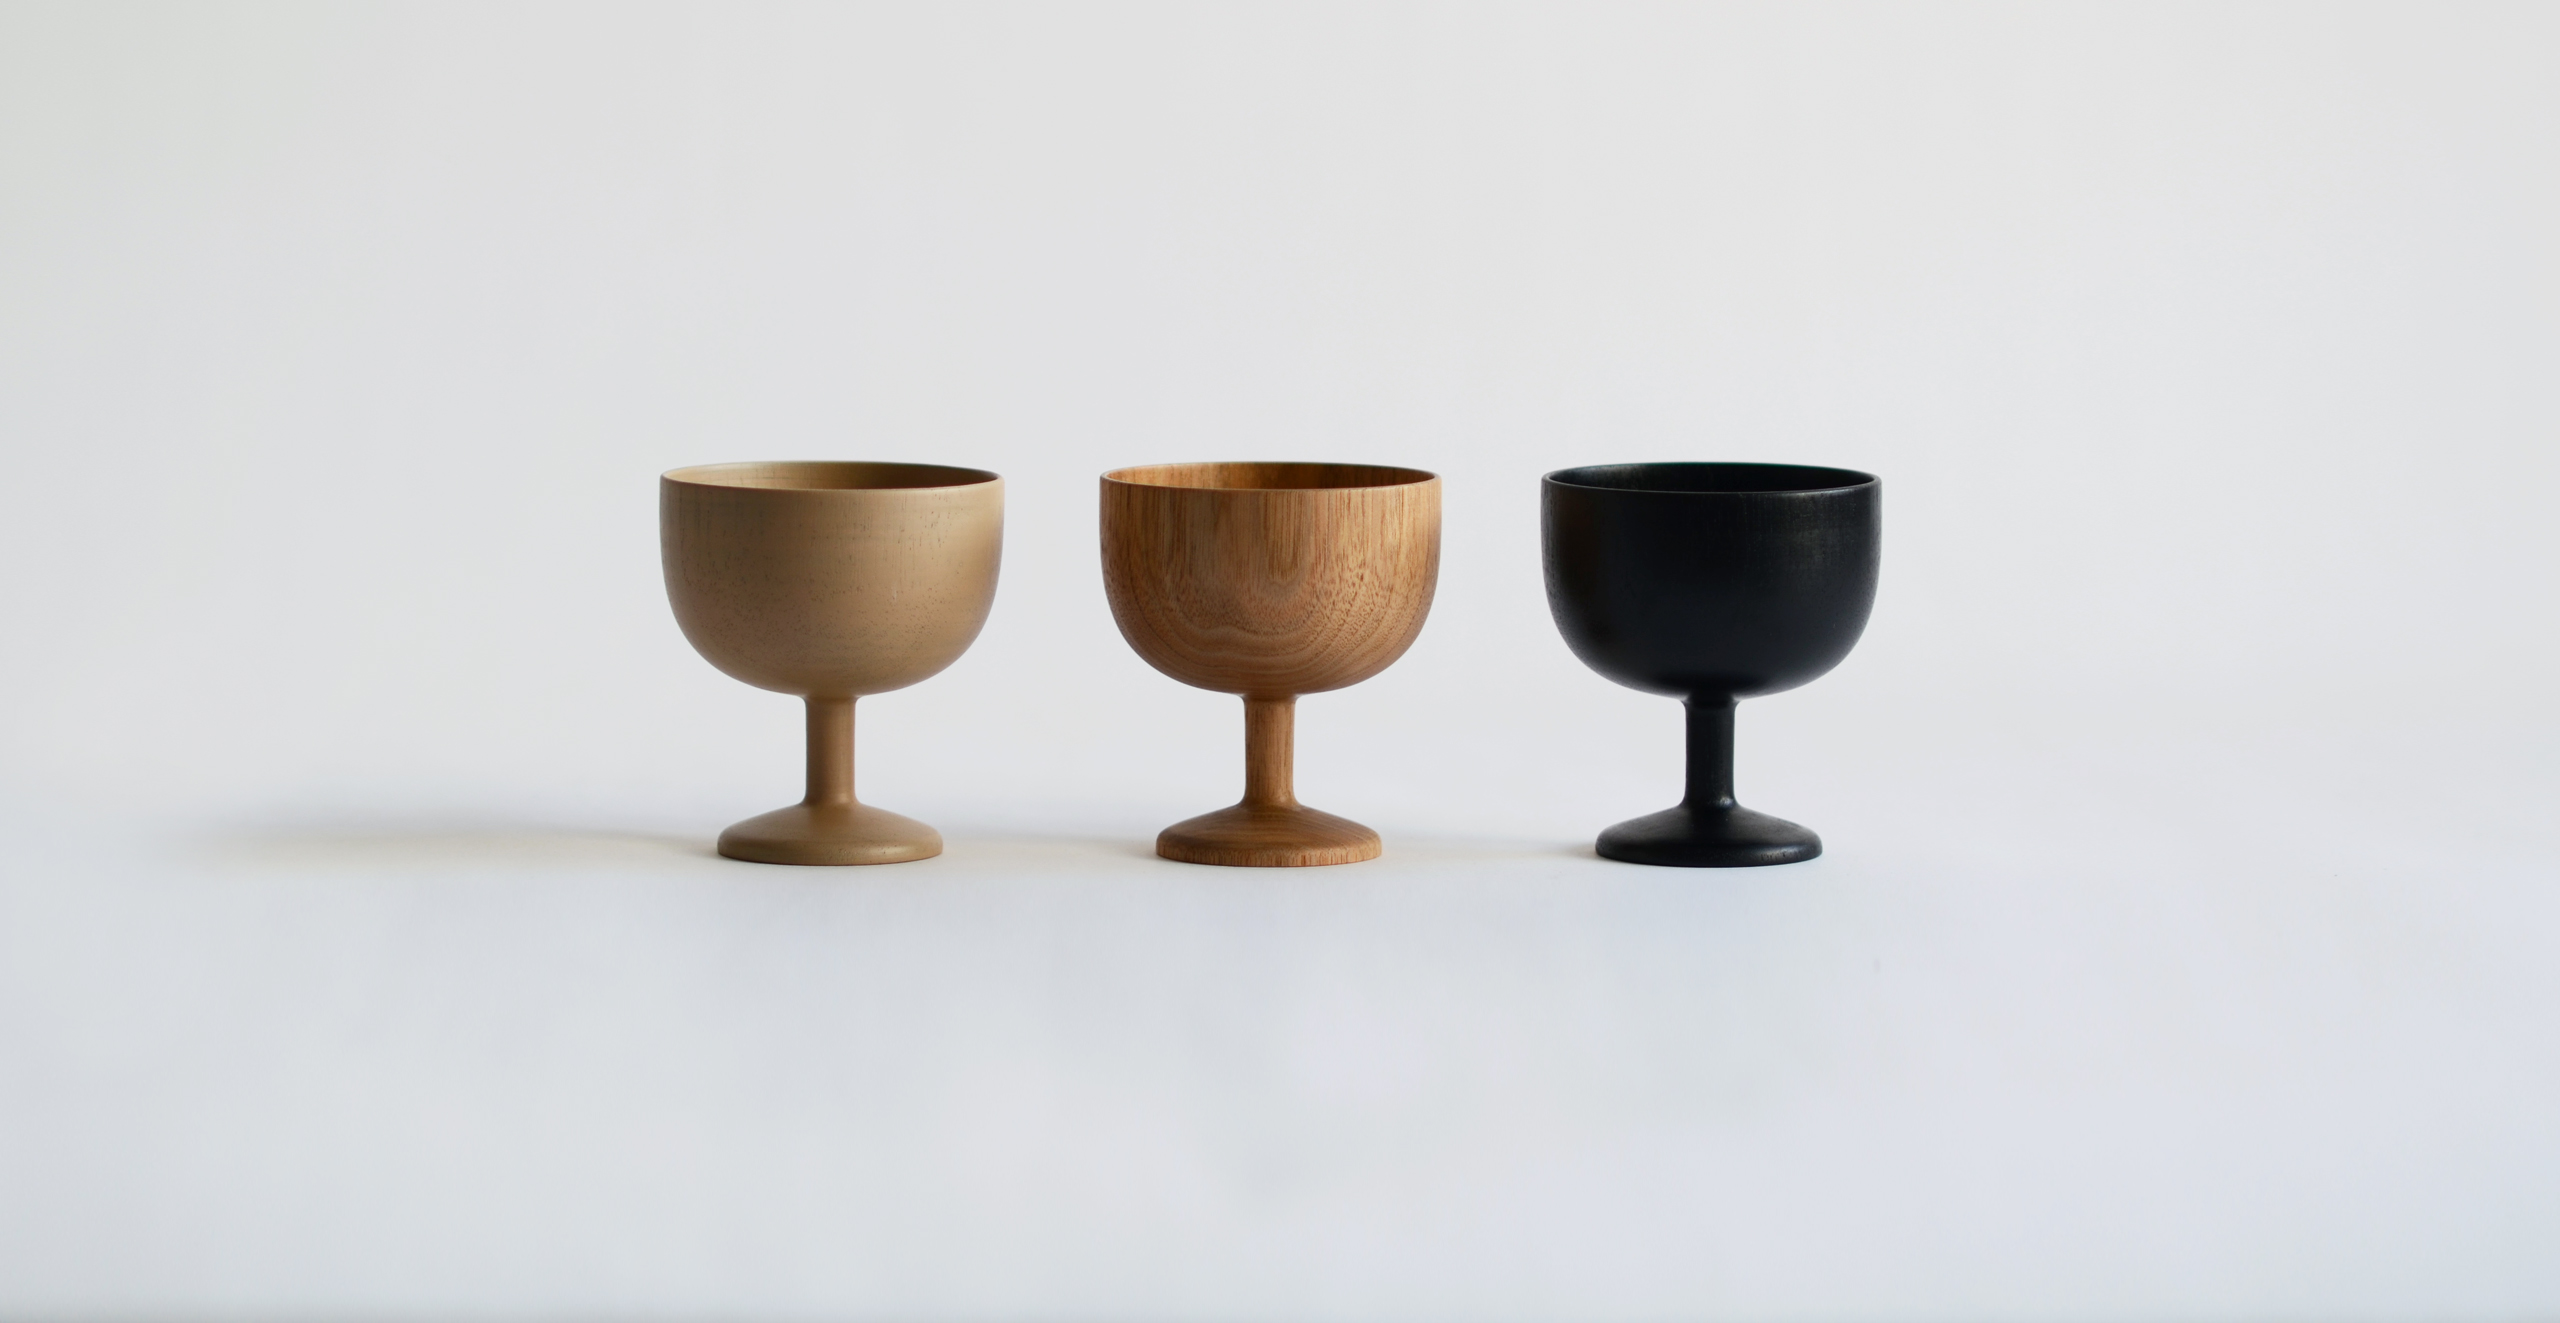 three wooden ice cream cups in a row against an offwhite background. 1 is urushi lacquered, one is wood and one is black